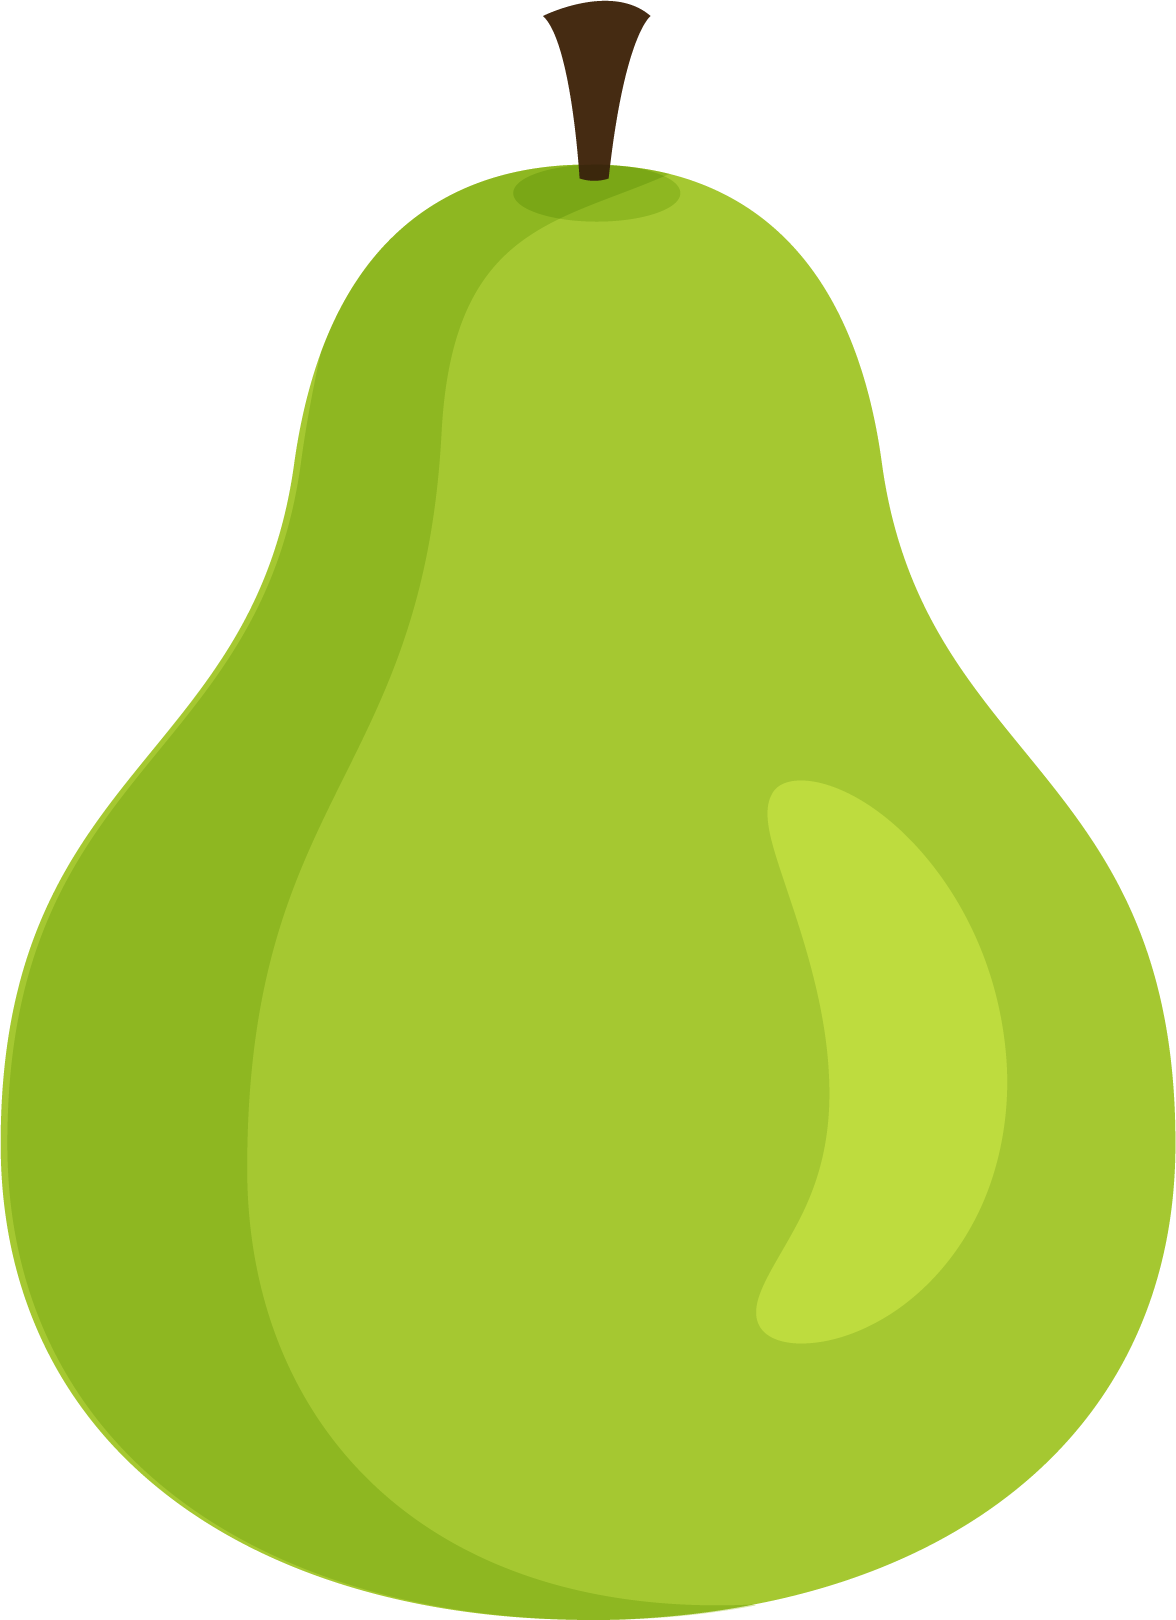 Pear Download Green Cartoon Pear Png Download 11761620 Free